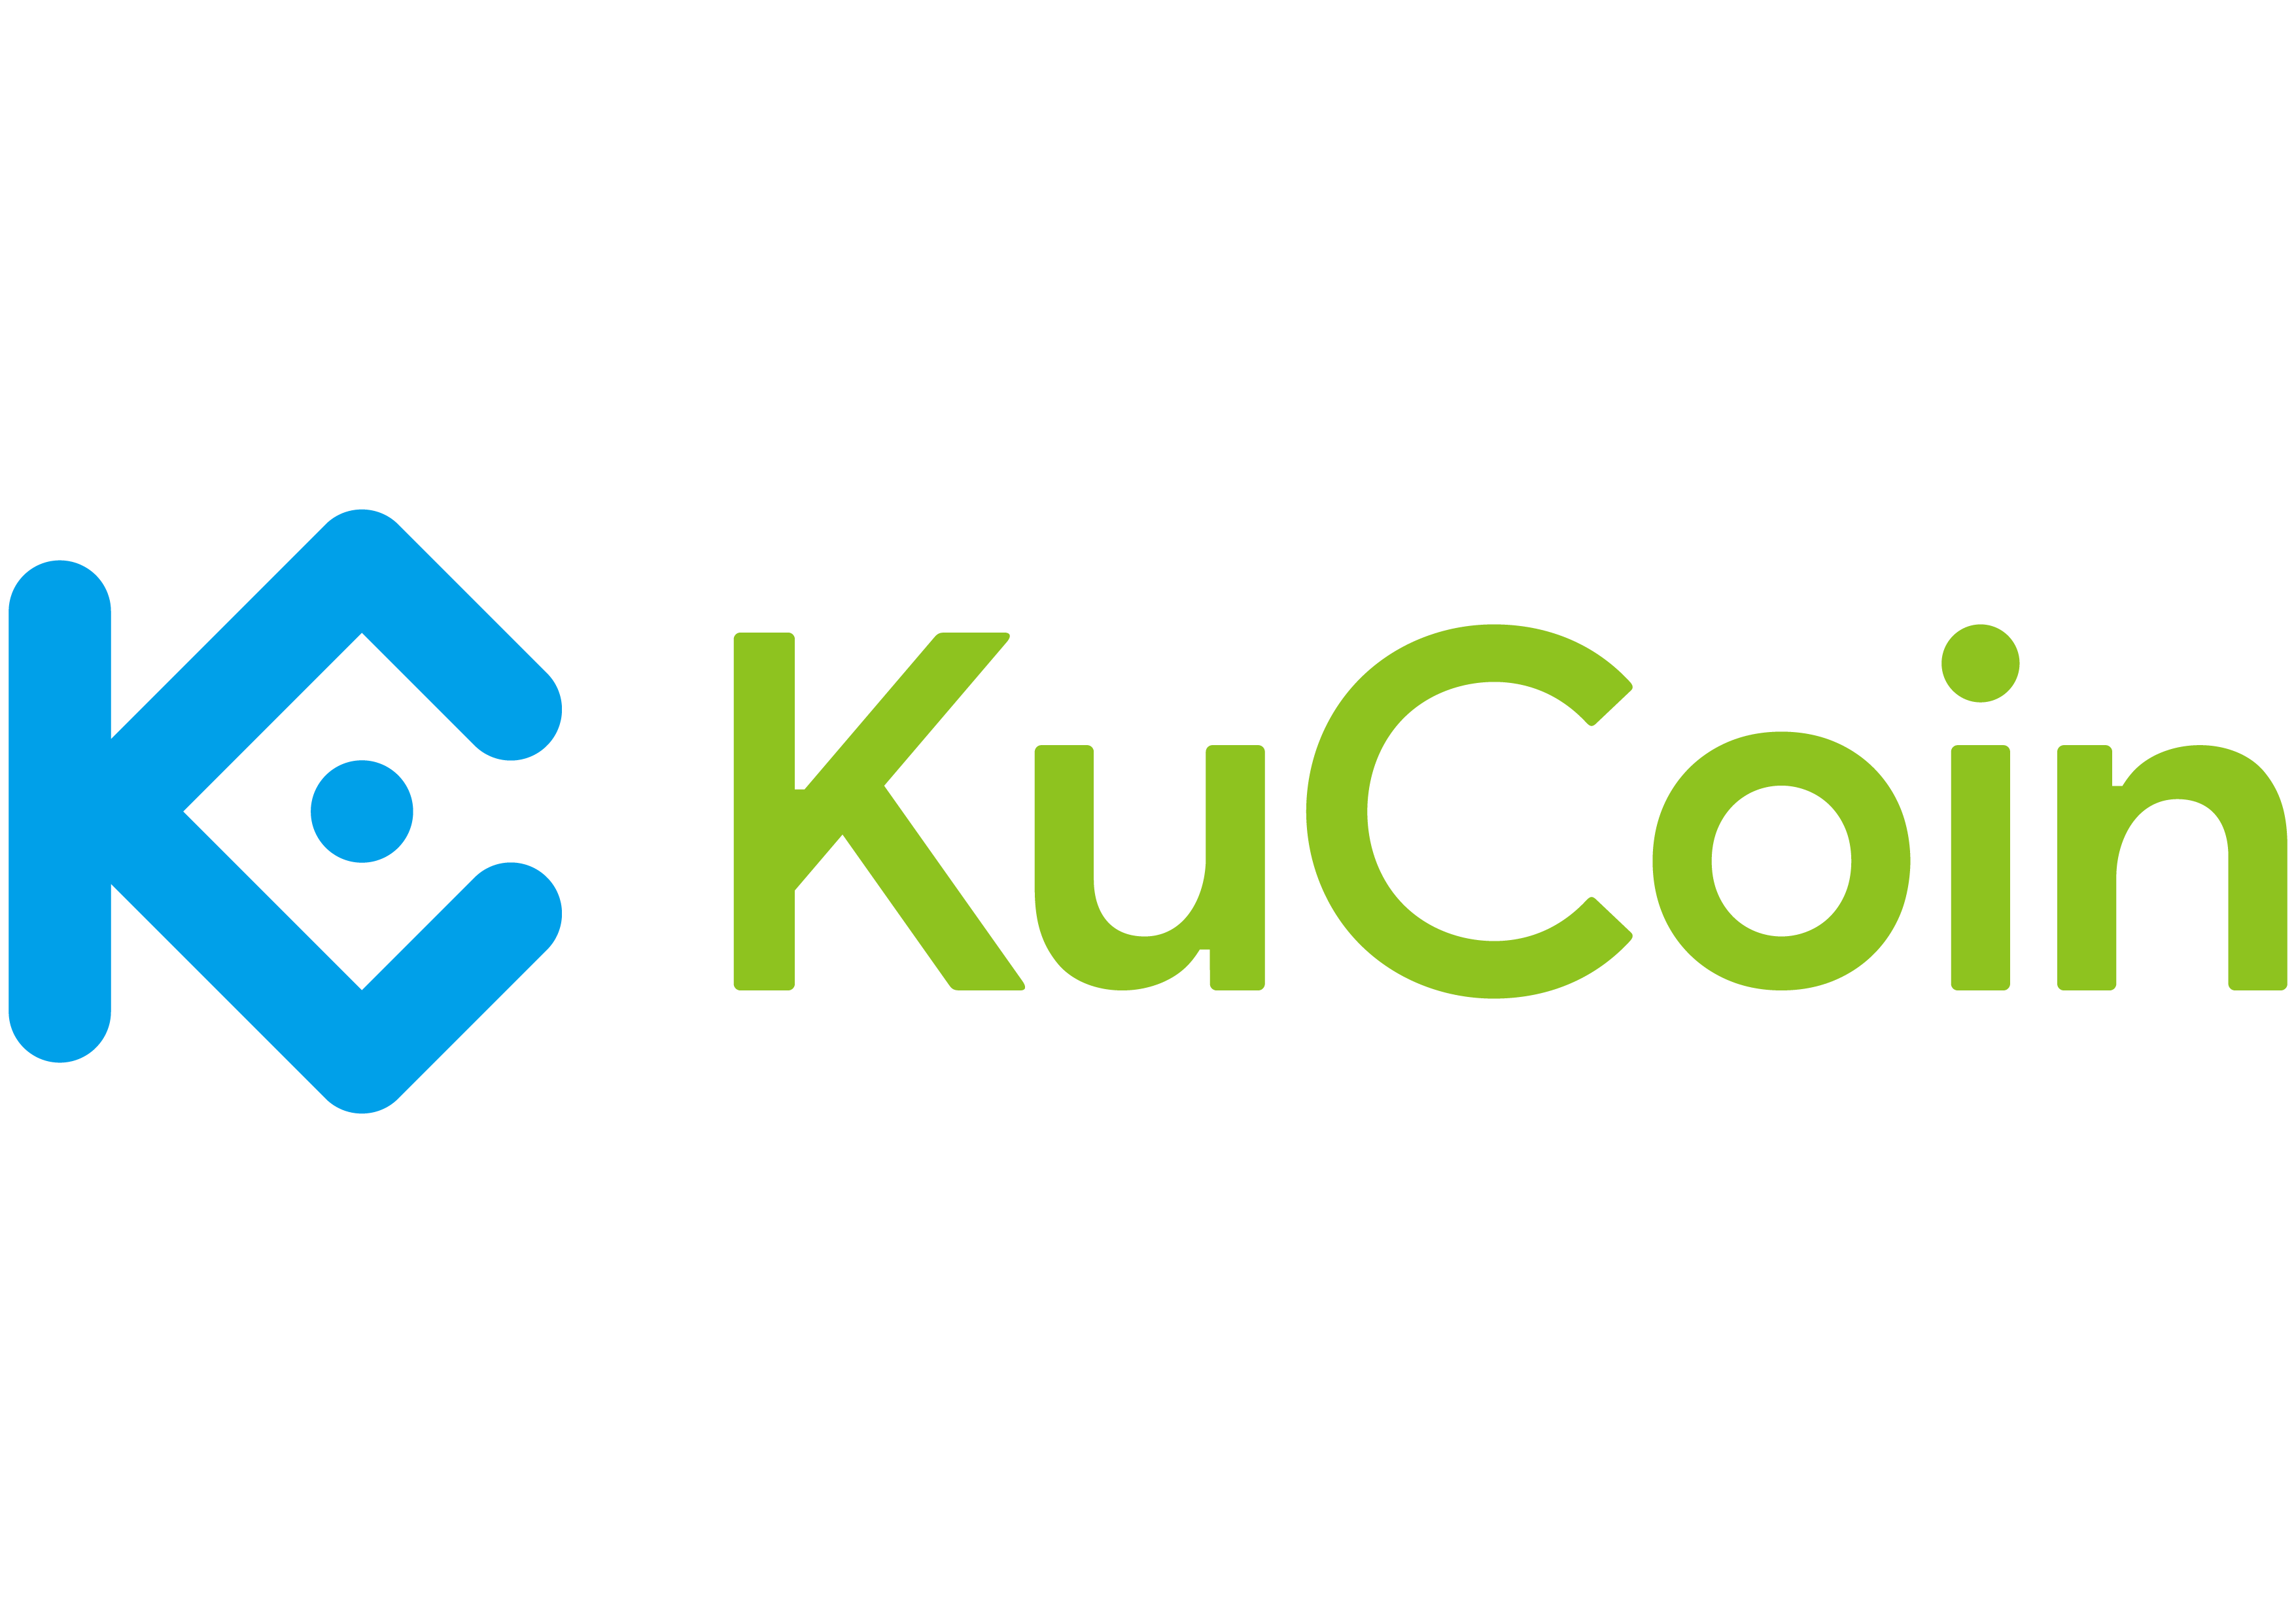 Need a great crypto exchange? Then read our full Kucoin review here!